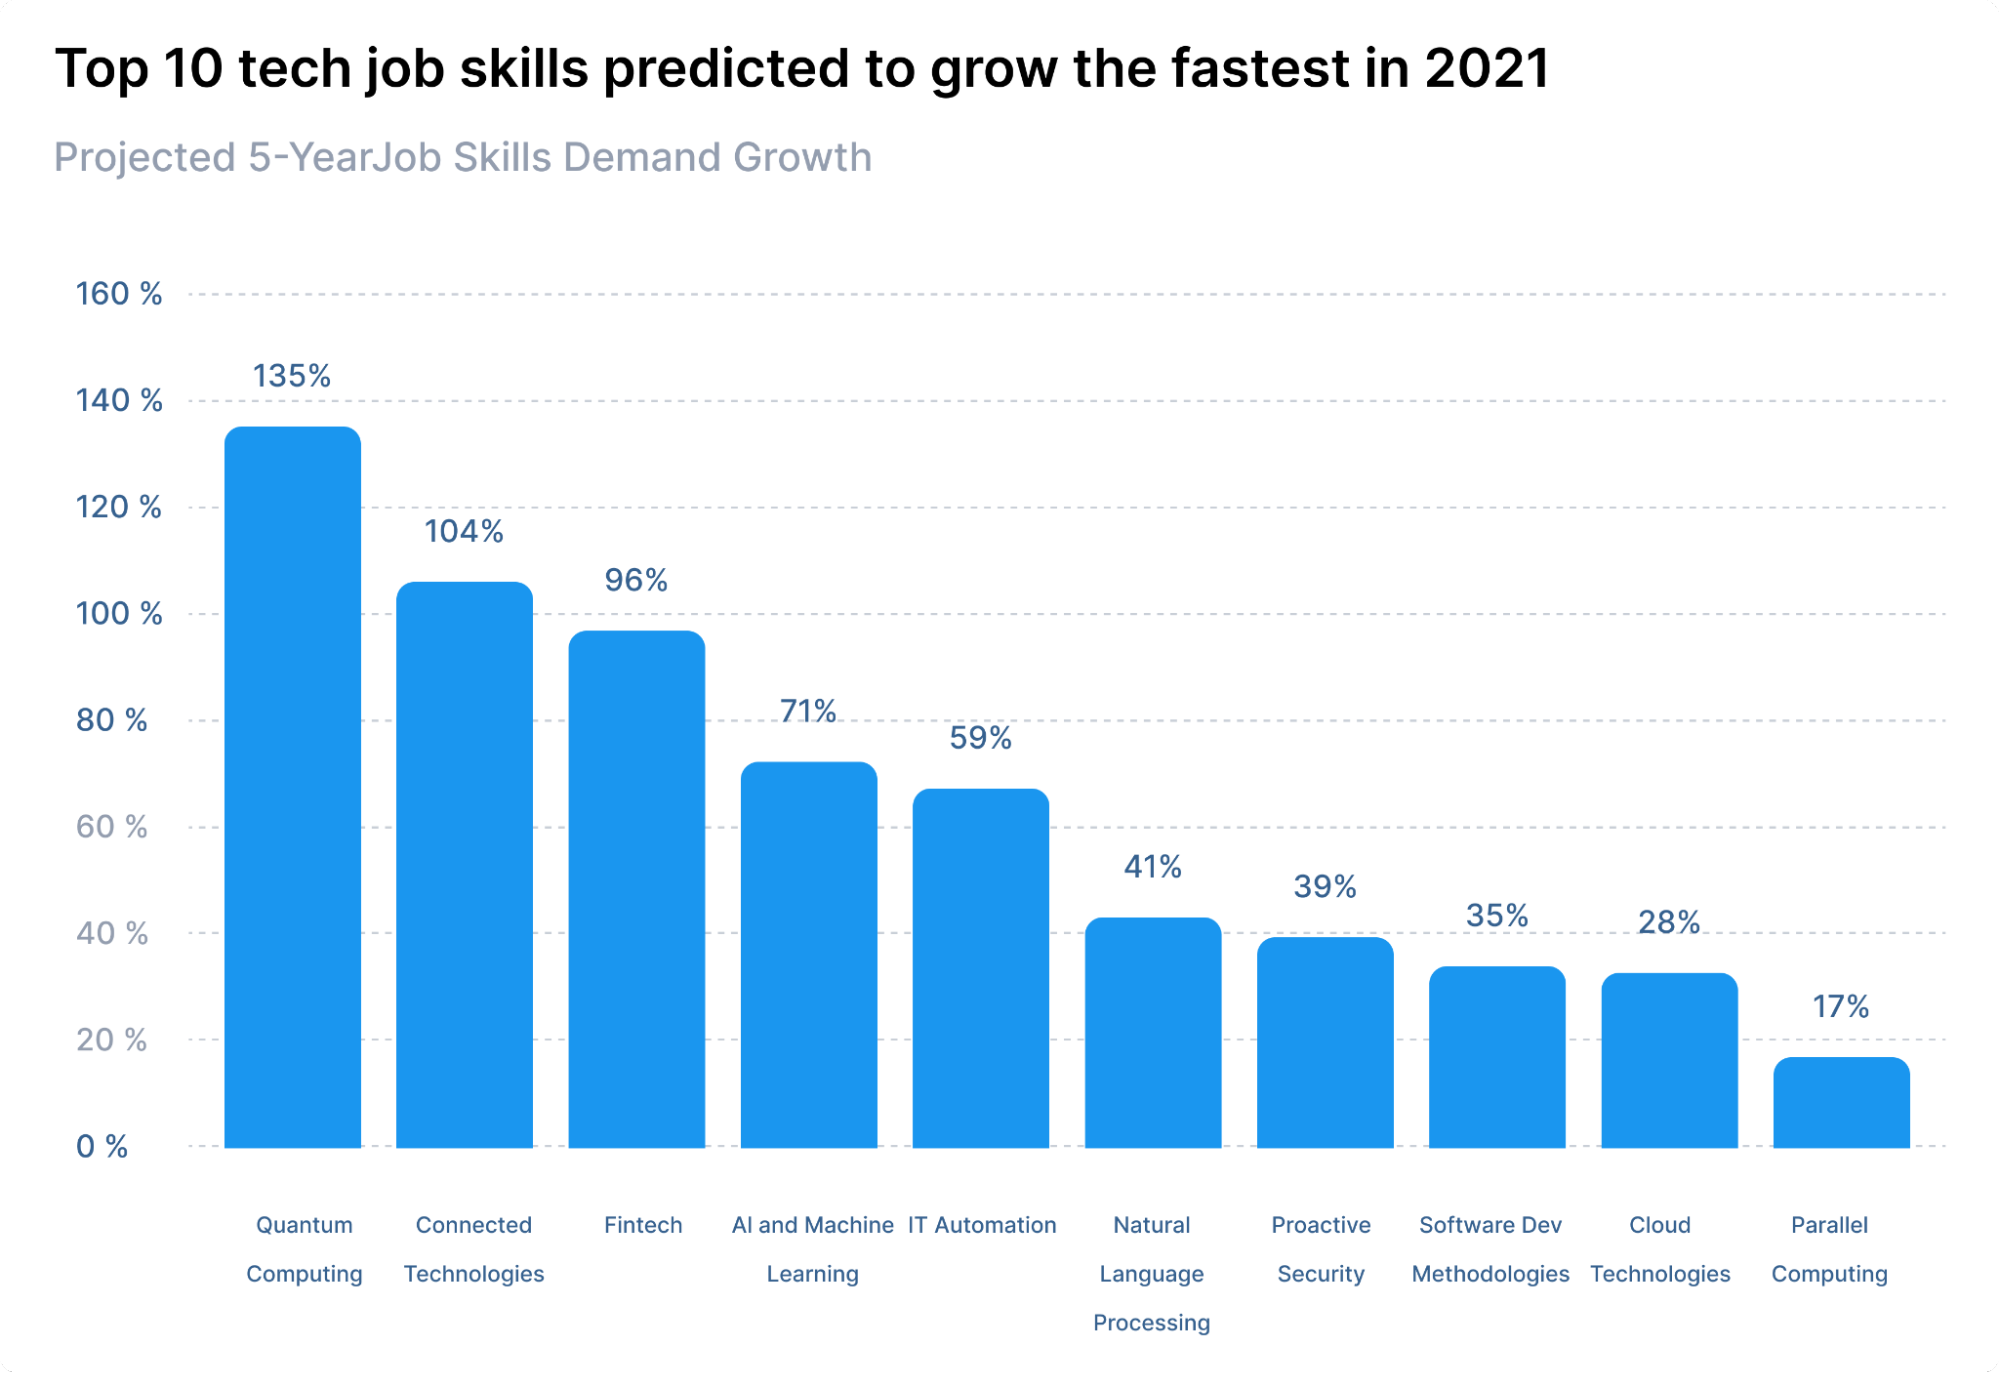 Top 10 tech job skills predicted to grow the fastest in 2021